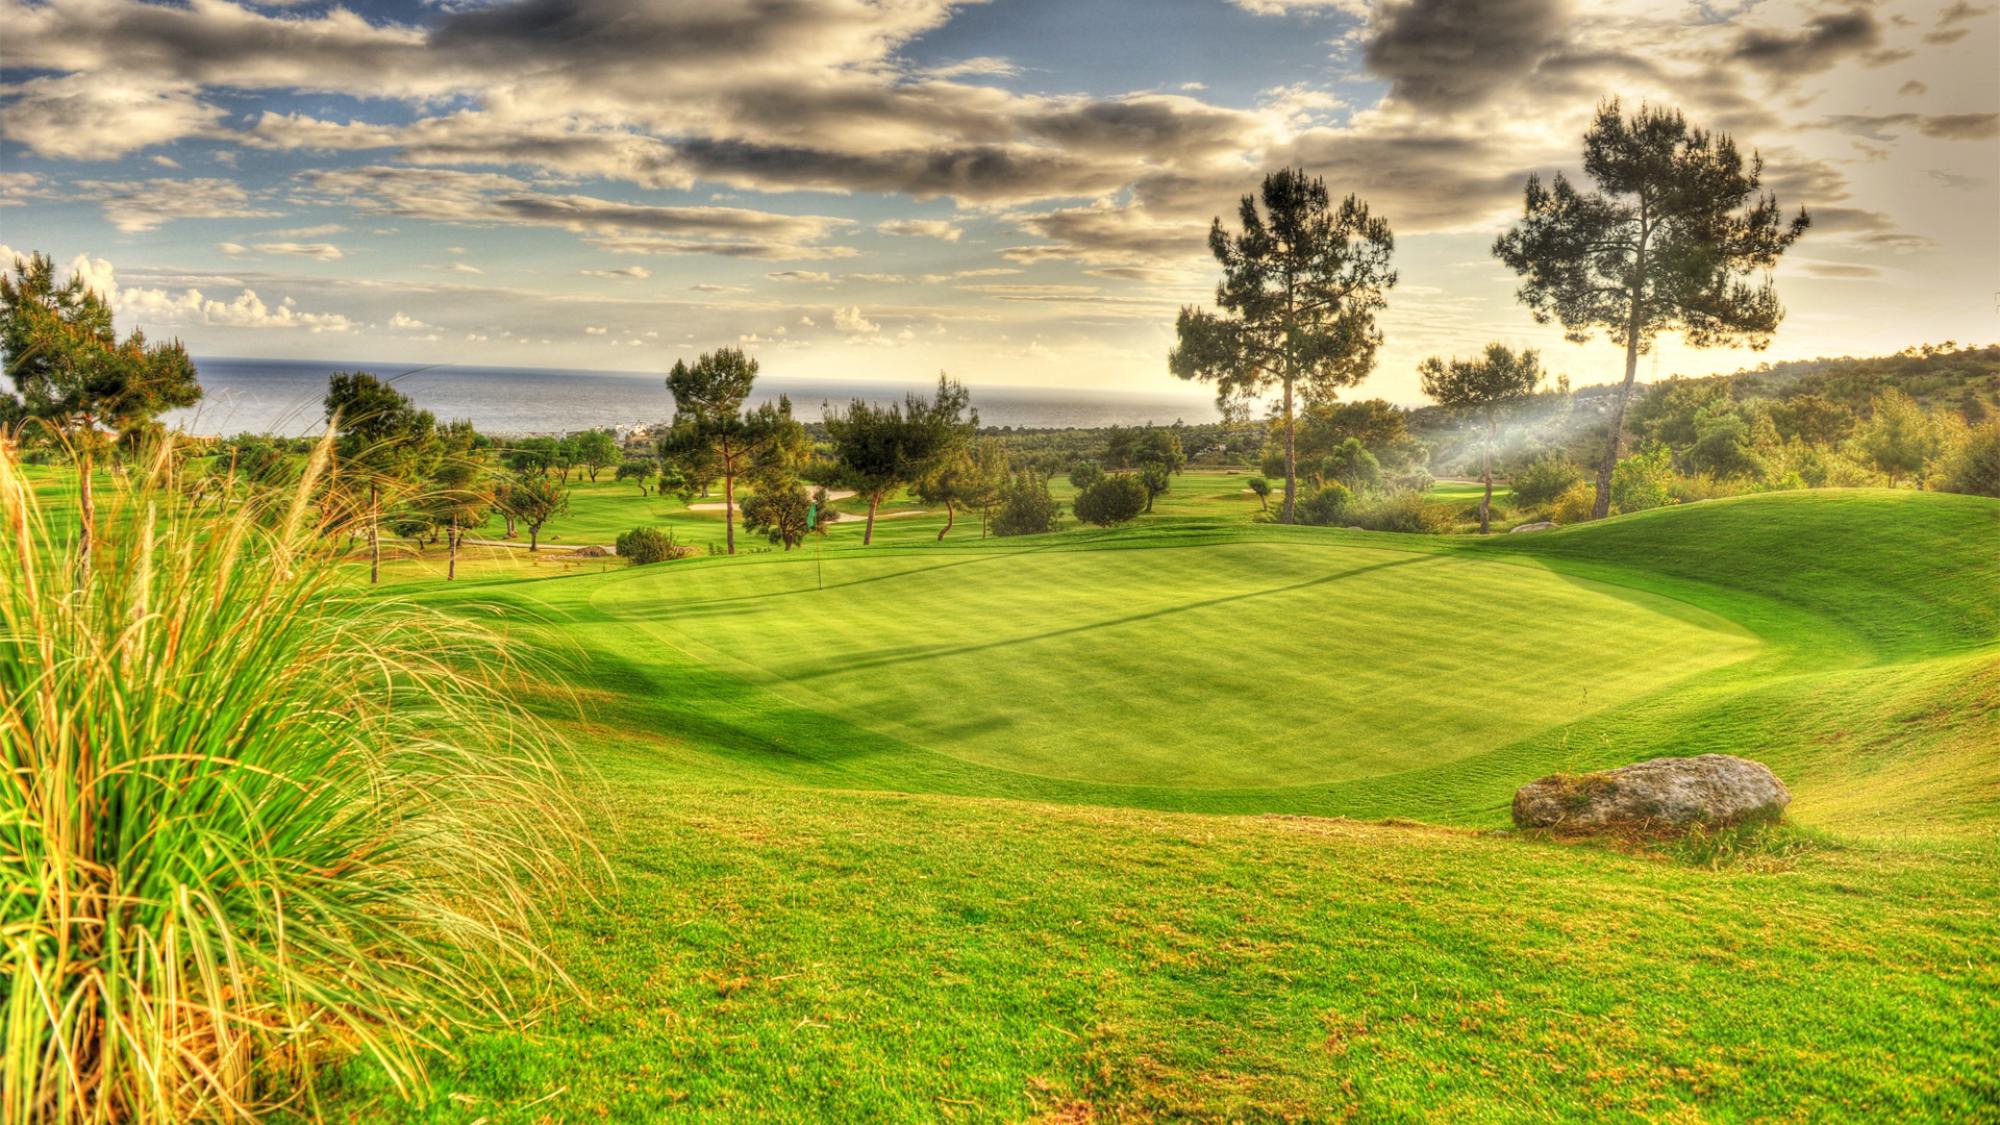 View Korineum Golf  Country Club's scenic golf course in vibrant Northern Cyprus.